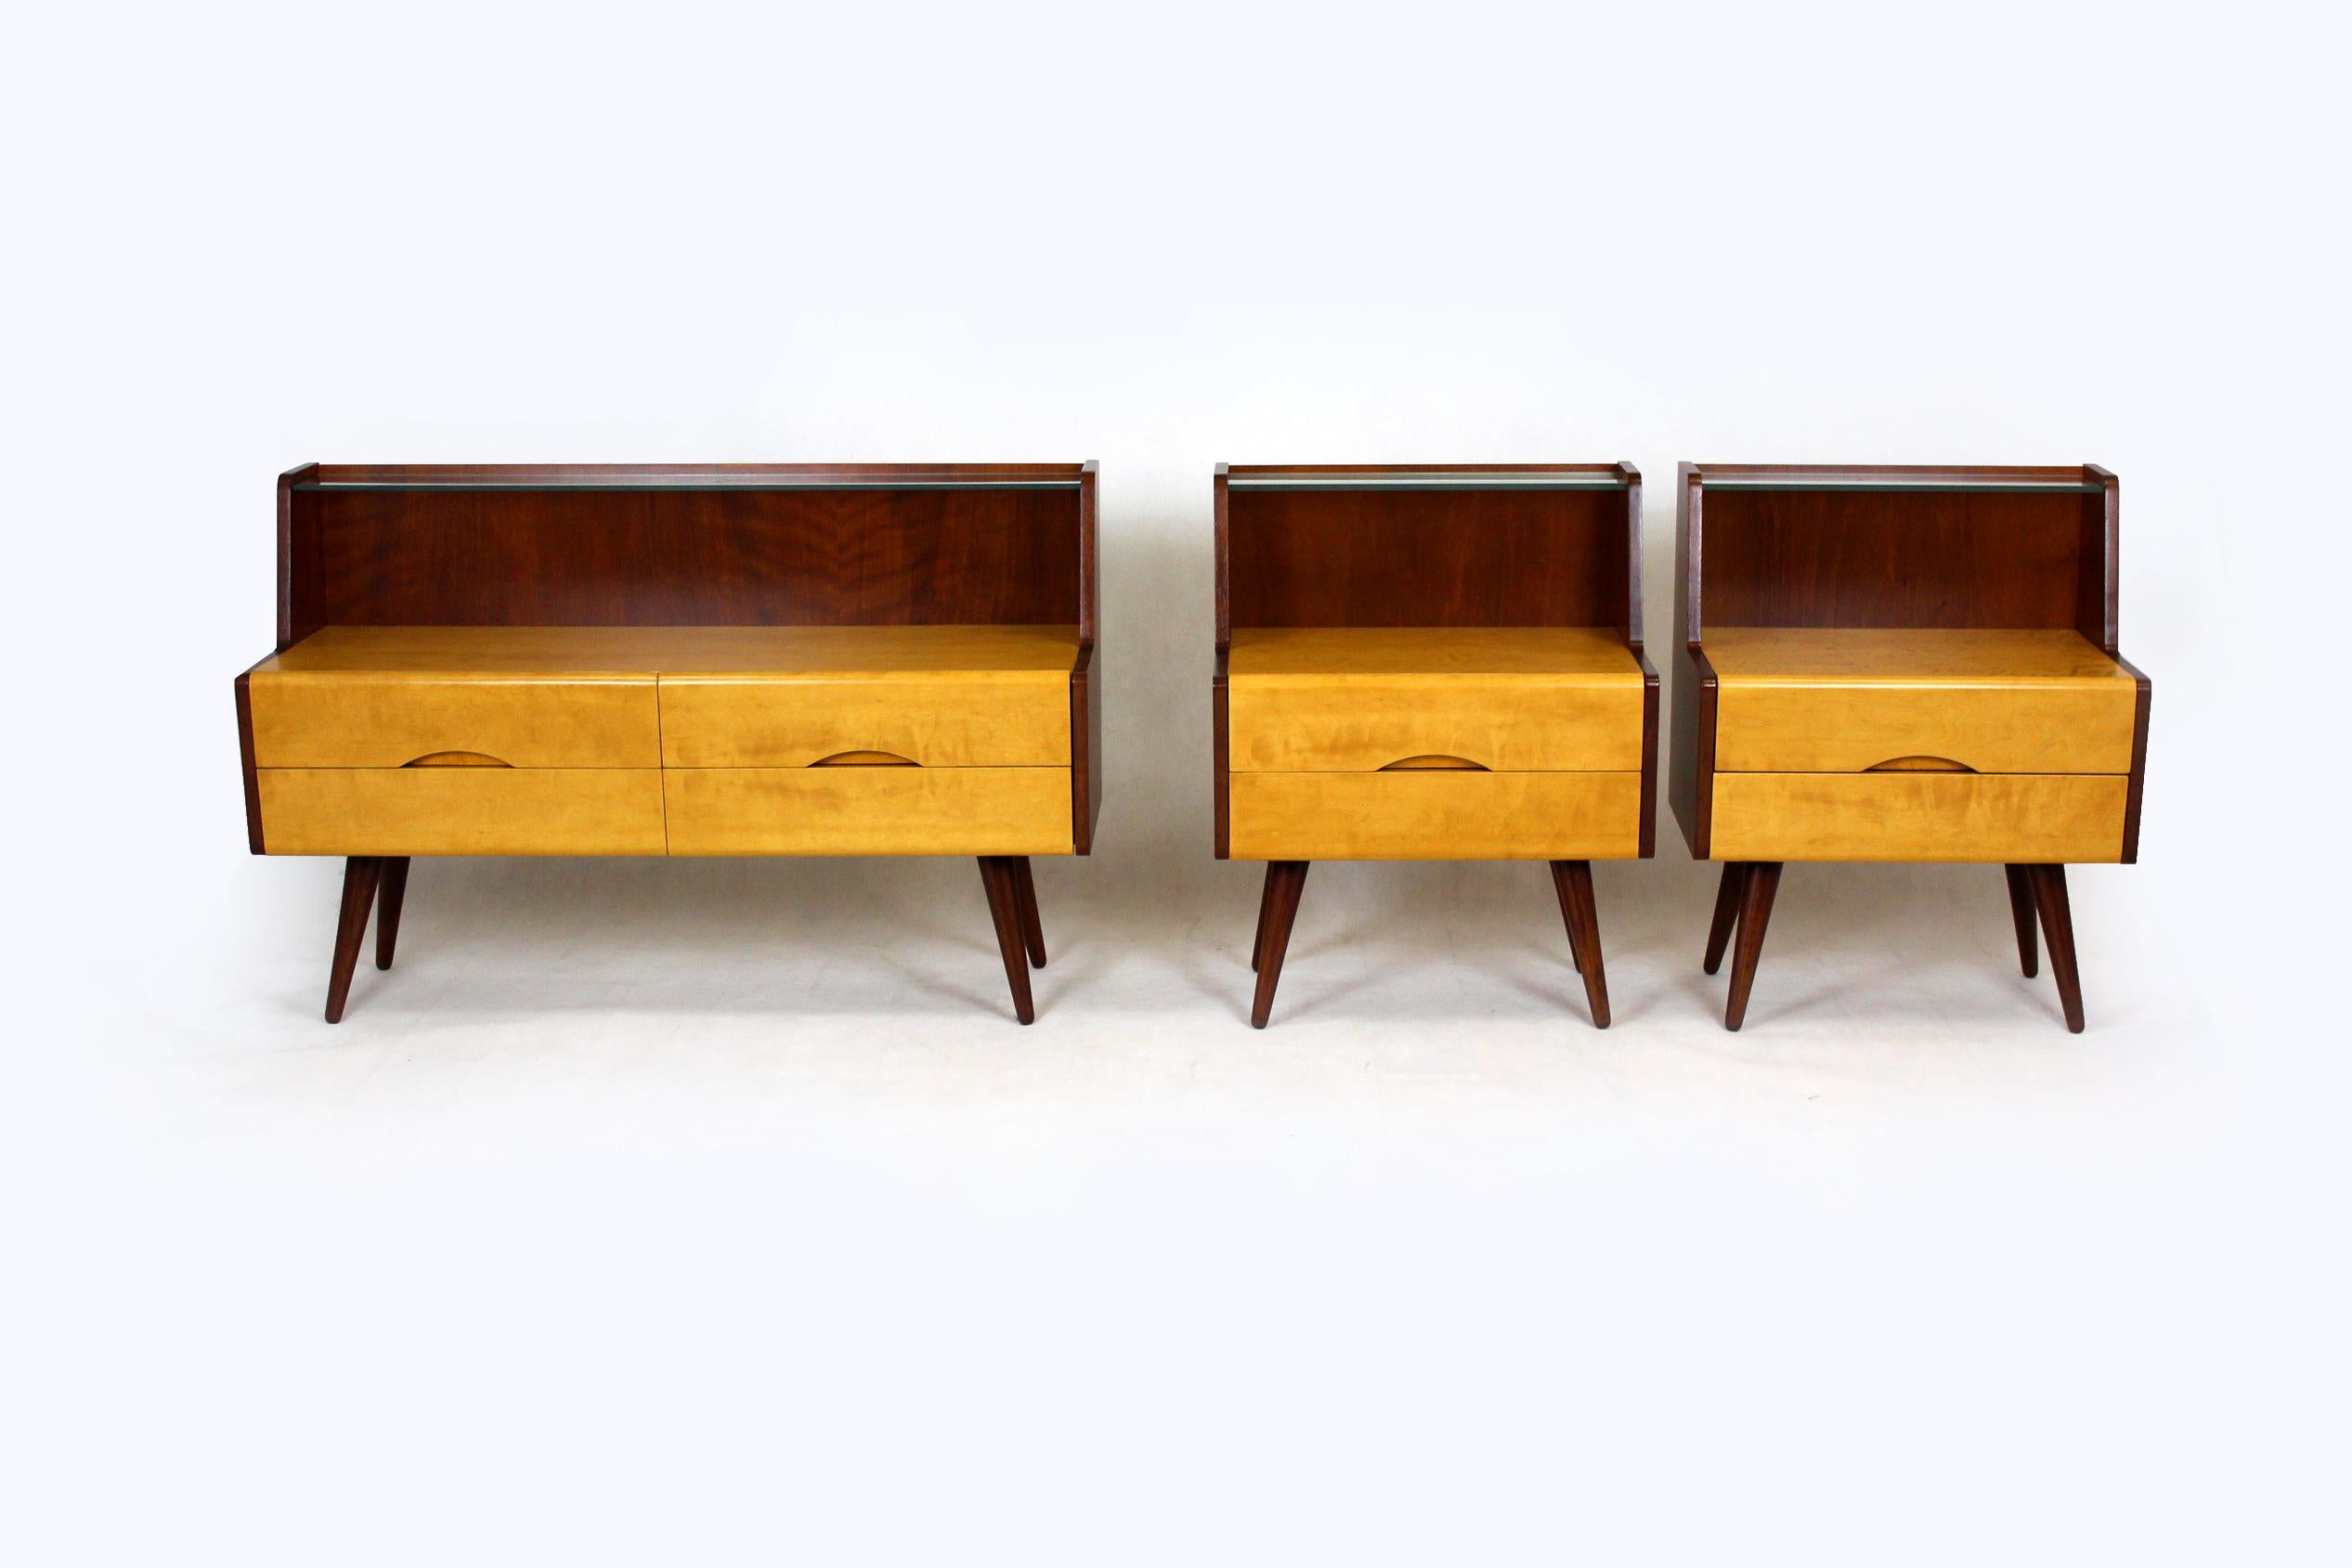 
This bedroom furniture set was produced in Czechslovakia in the 1960s. 
The set consists of two bedside tables and one small chest of drawers. 
The cabinets have been partially restored - the legs and elements made of light wood have been lacquered